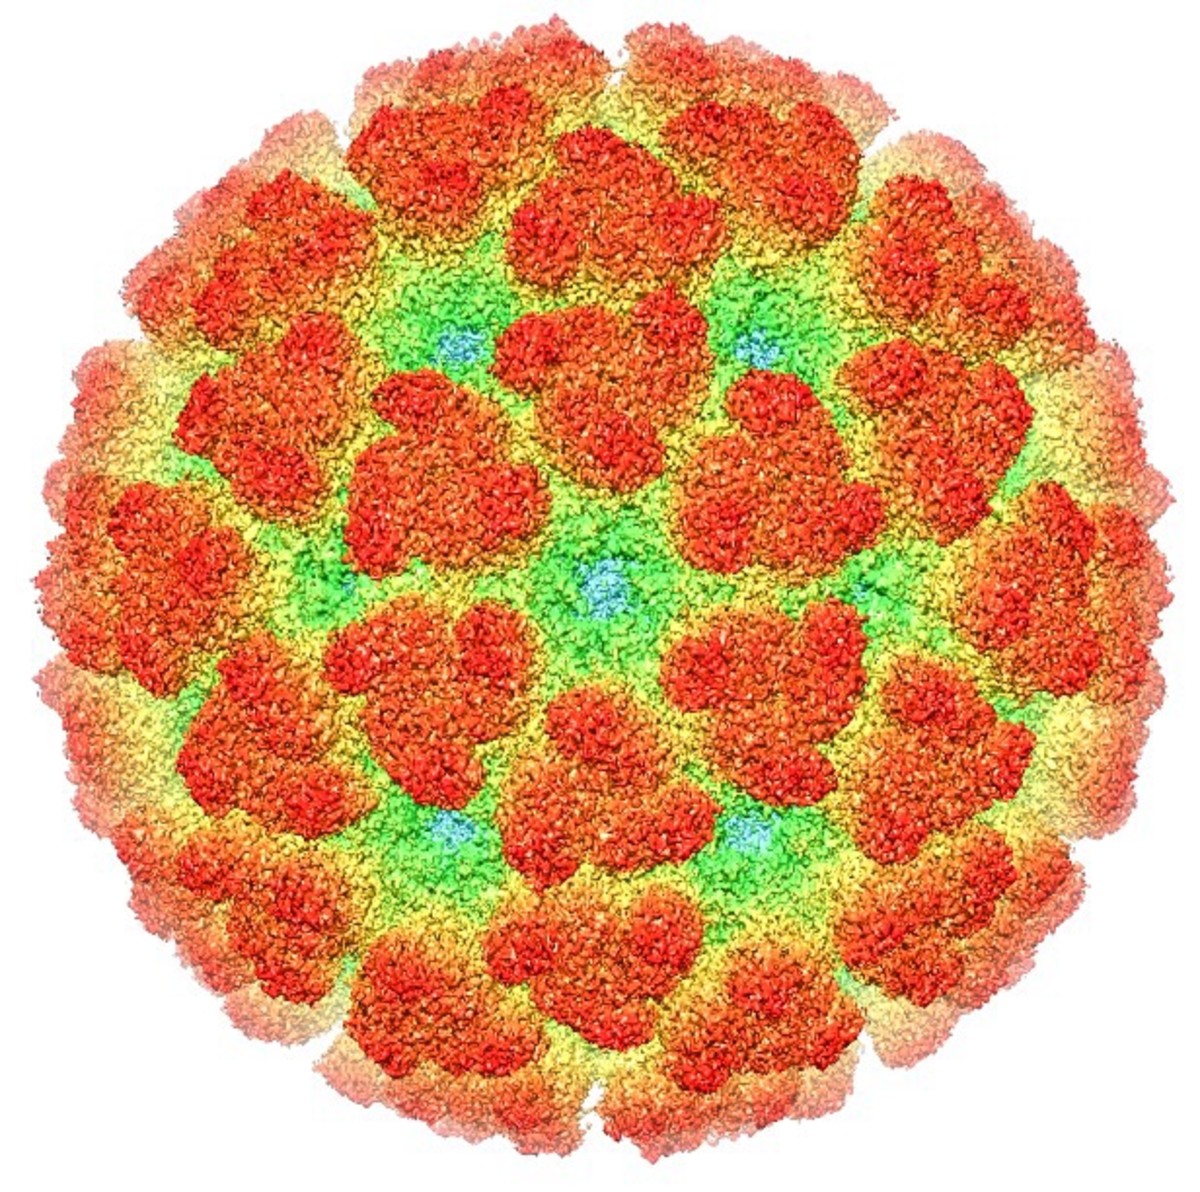 A reconstruction of the Chikungunya virus as viewed through an electron microscope 